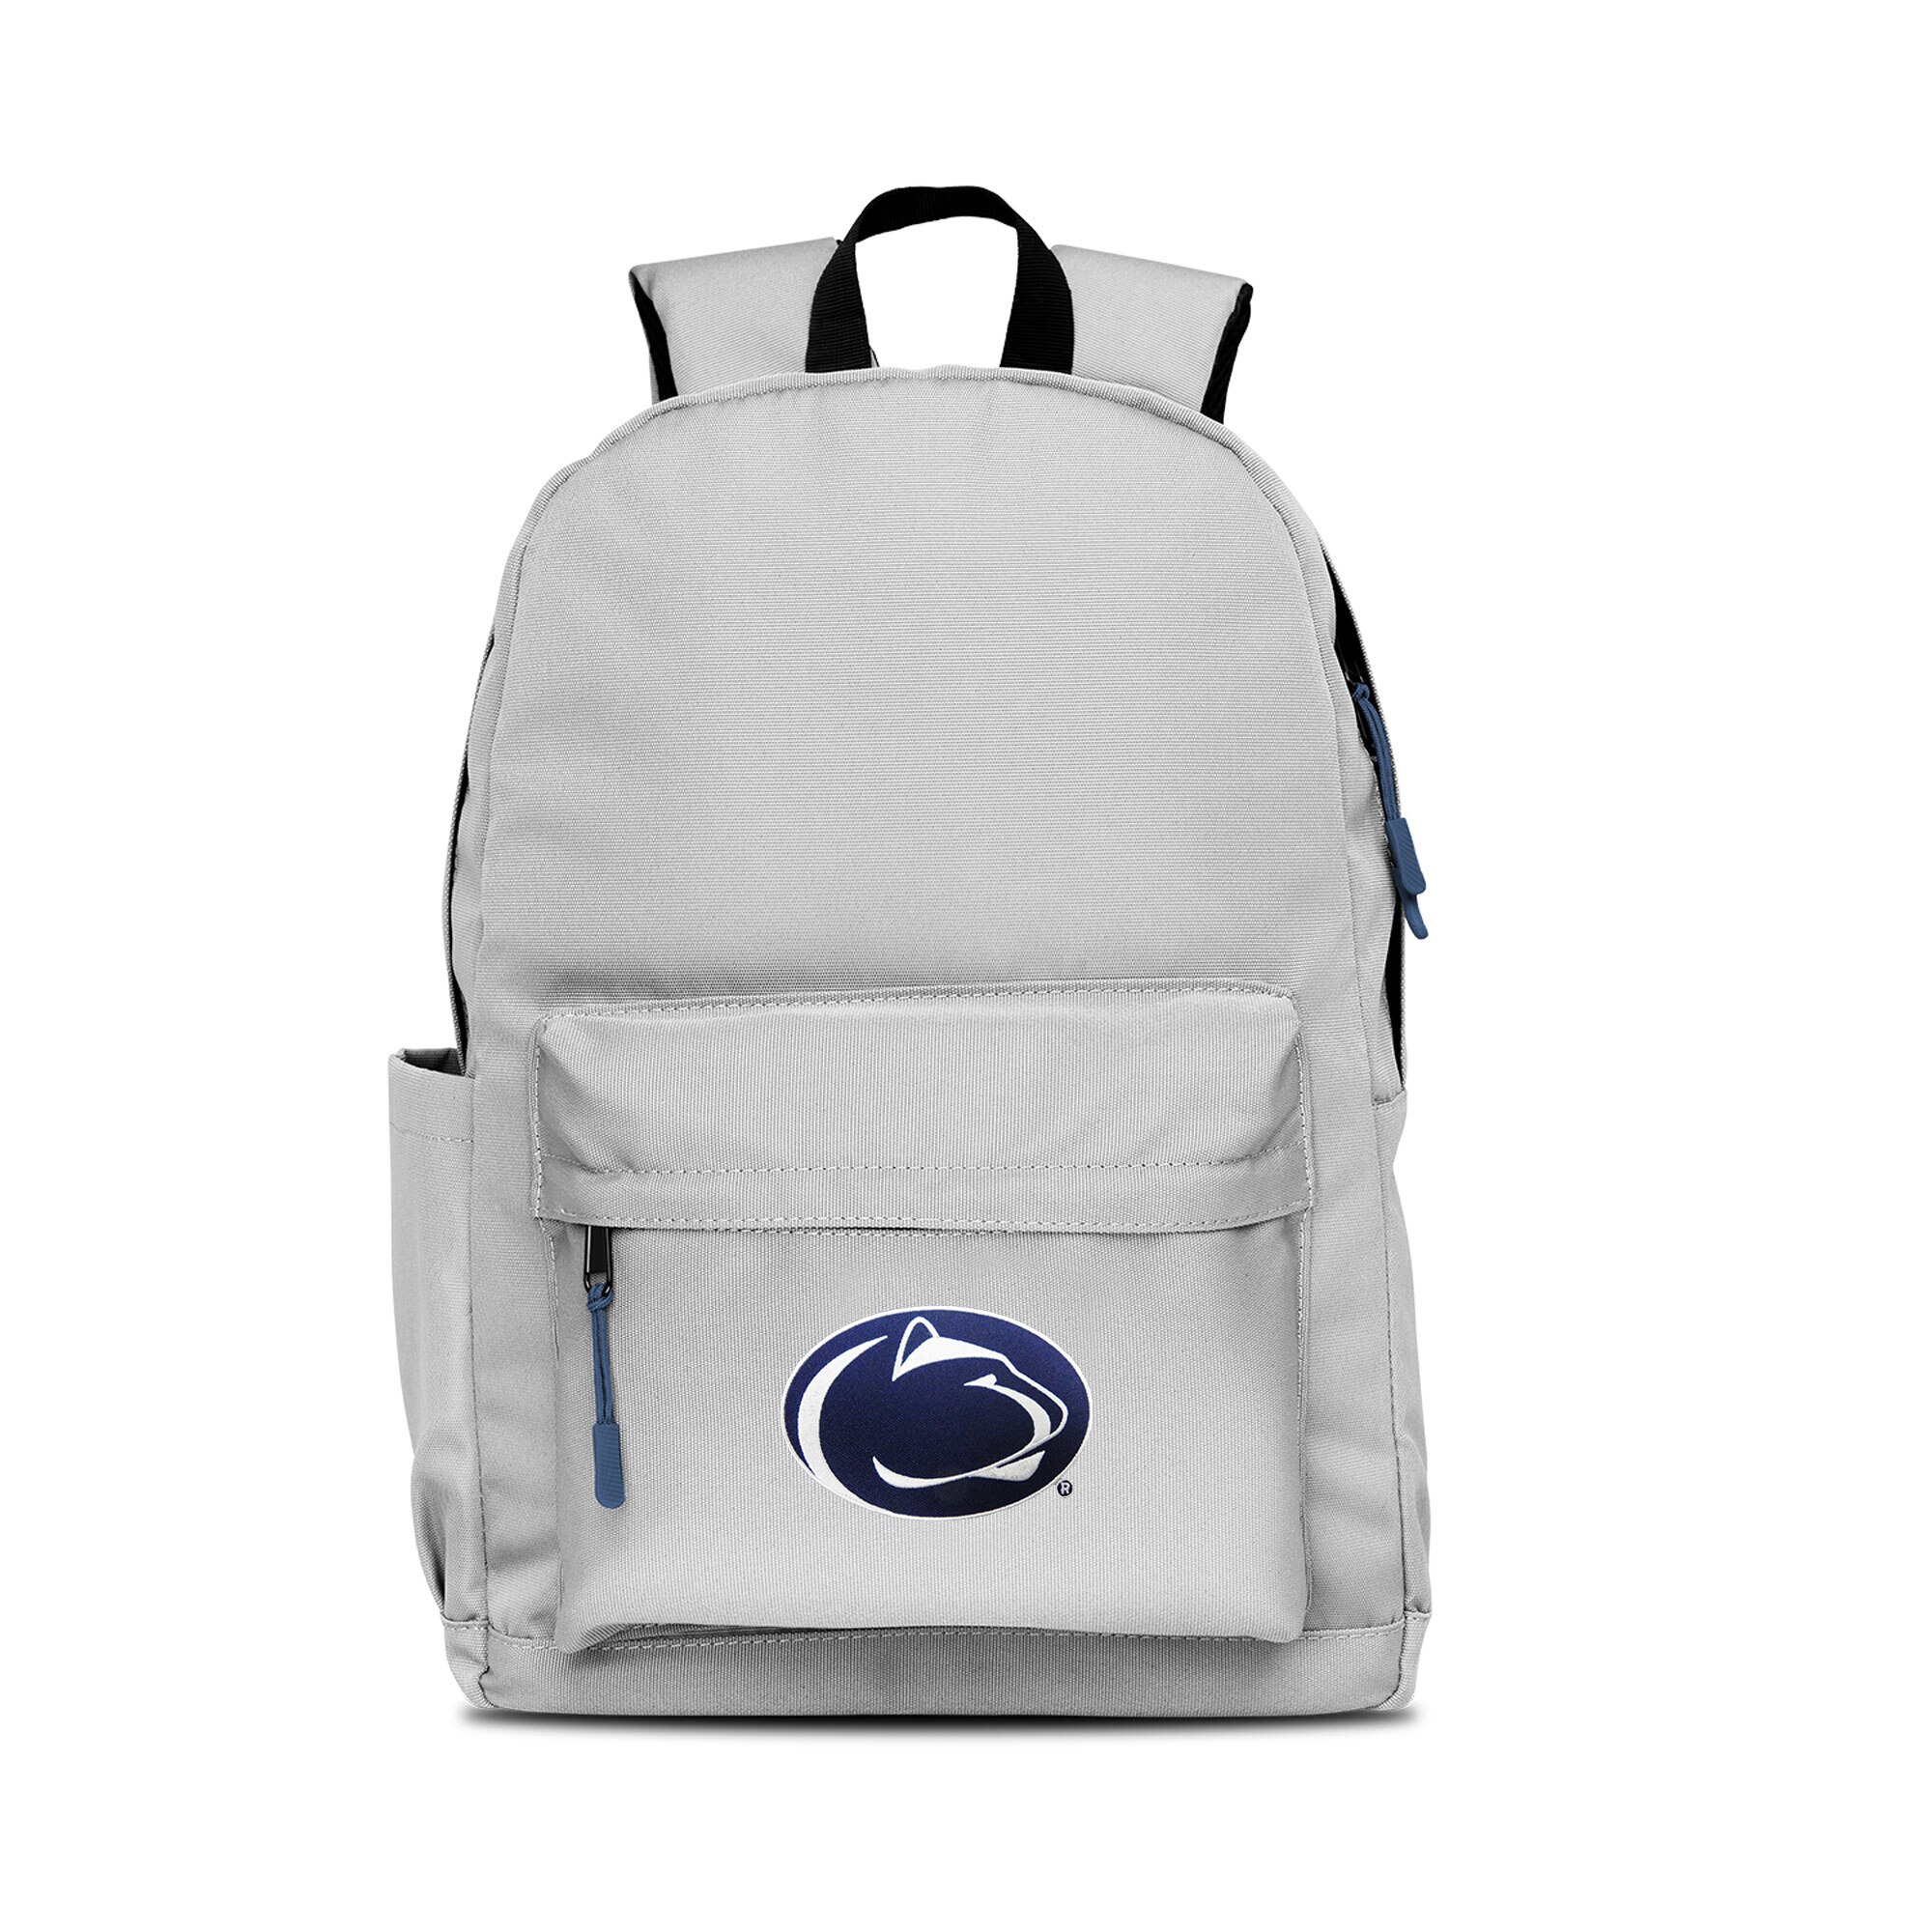 Penn State Nittany Lions L716 Campus Backpack Backpacks and Bags